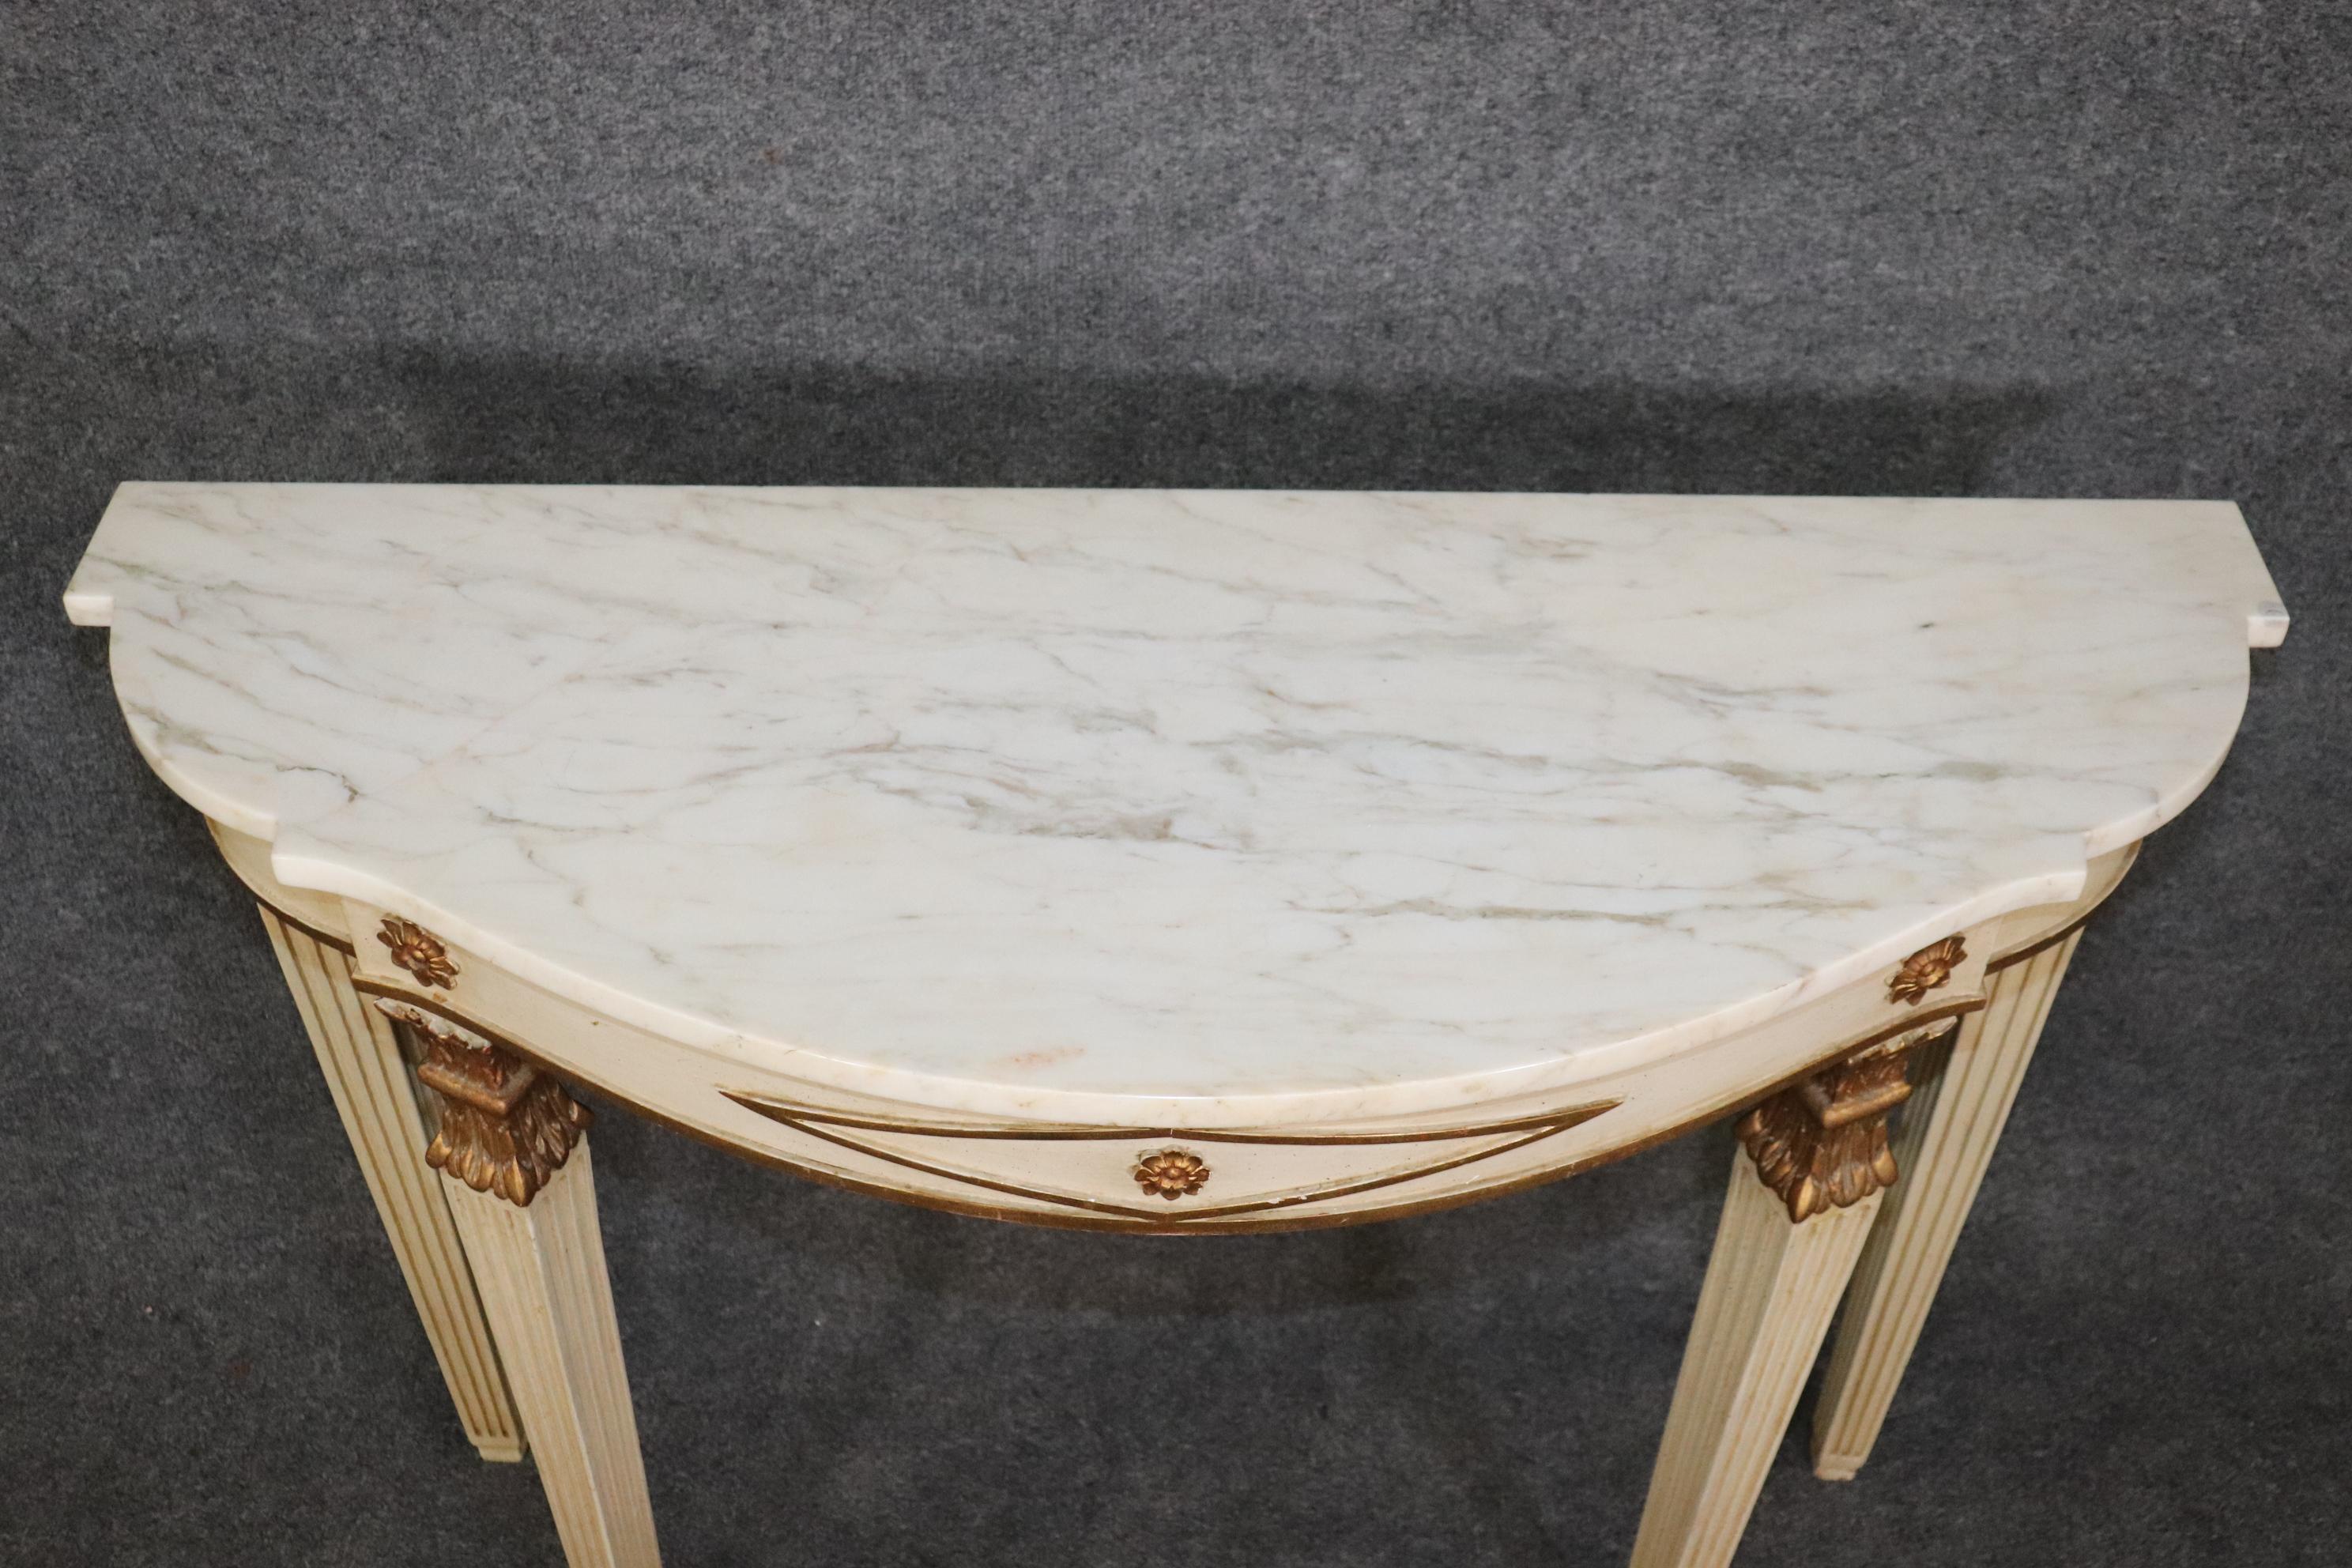 This is a gorgeous antique paint Decorated and gilded marble top console table in the Directoire style. The table is in good condition with no issues to speak of and measures 42.5 wide x 33.25 tall x 15.5 deep. The table has a nice marble top and